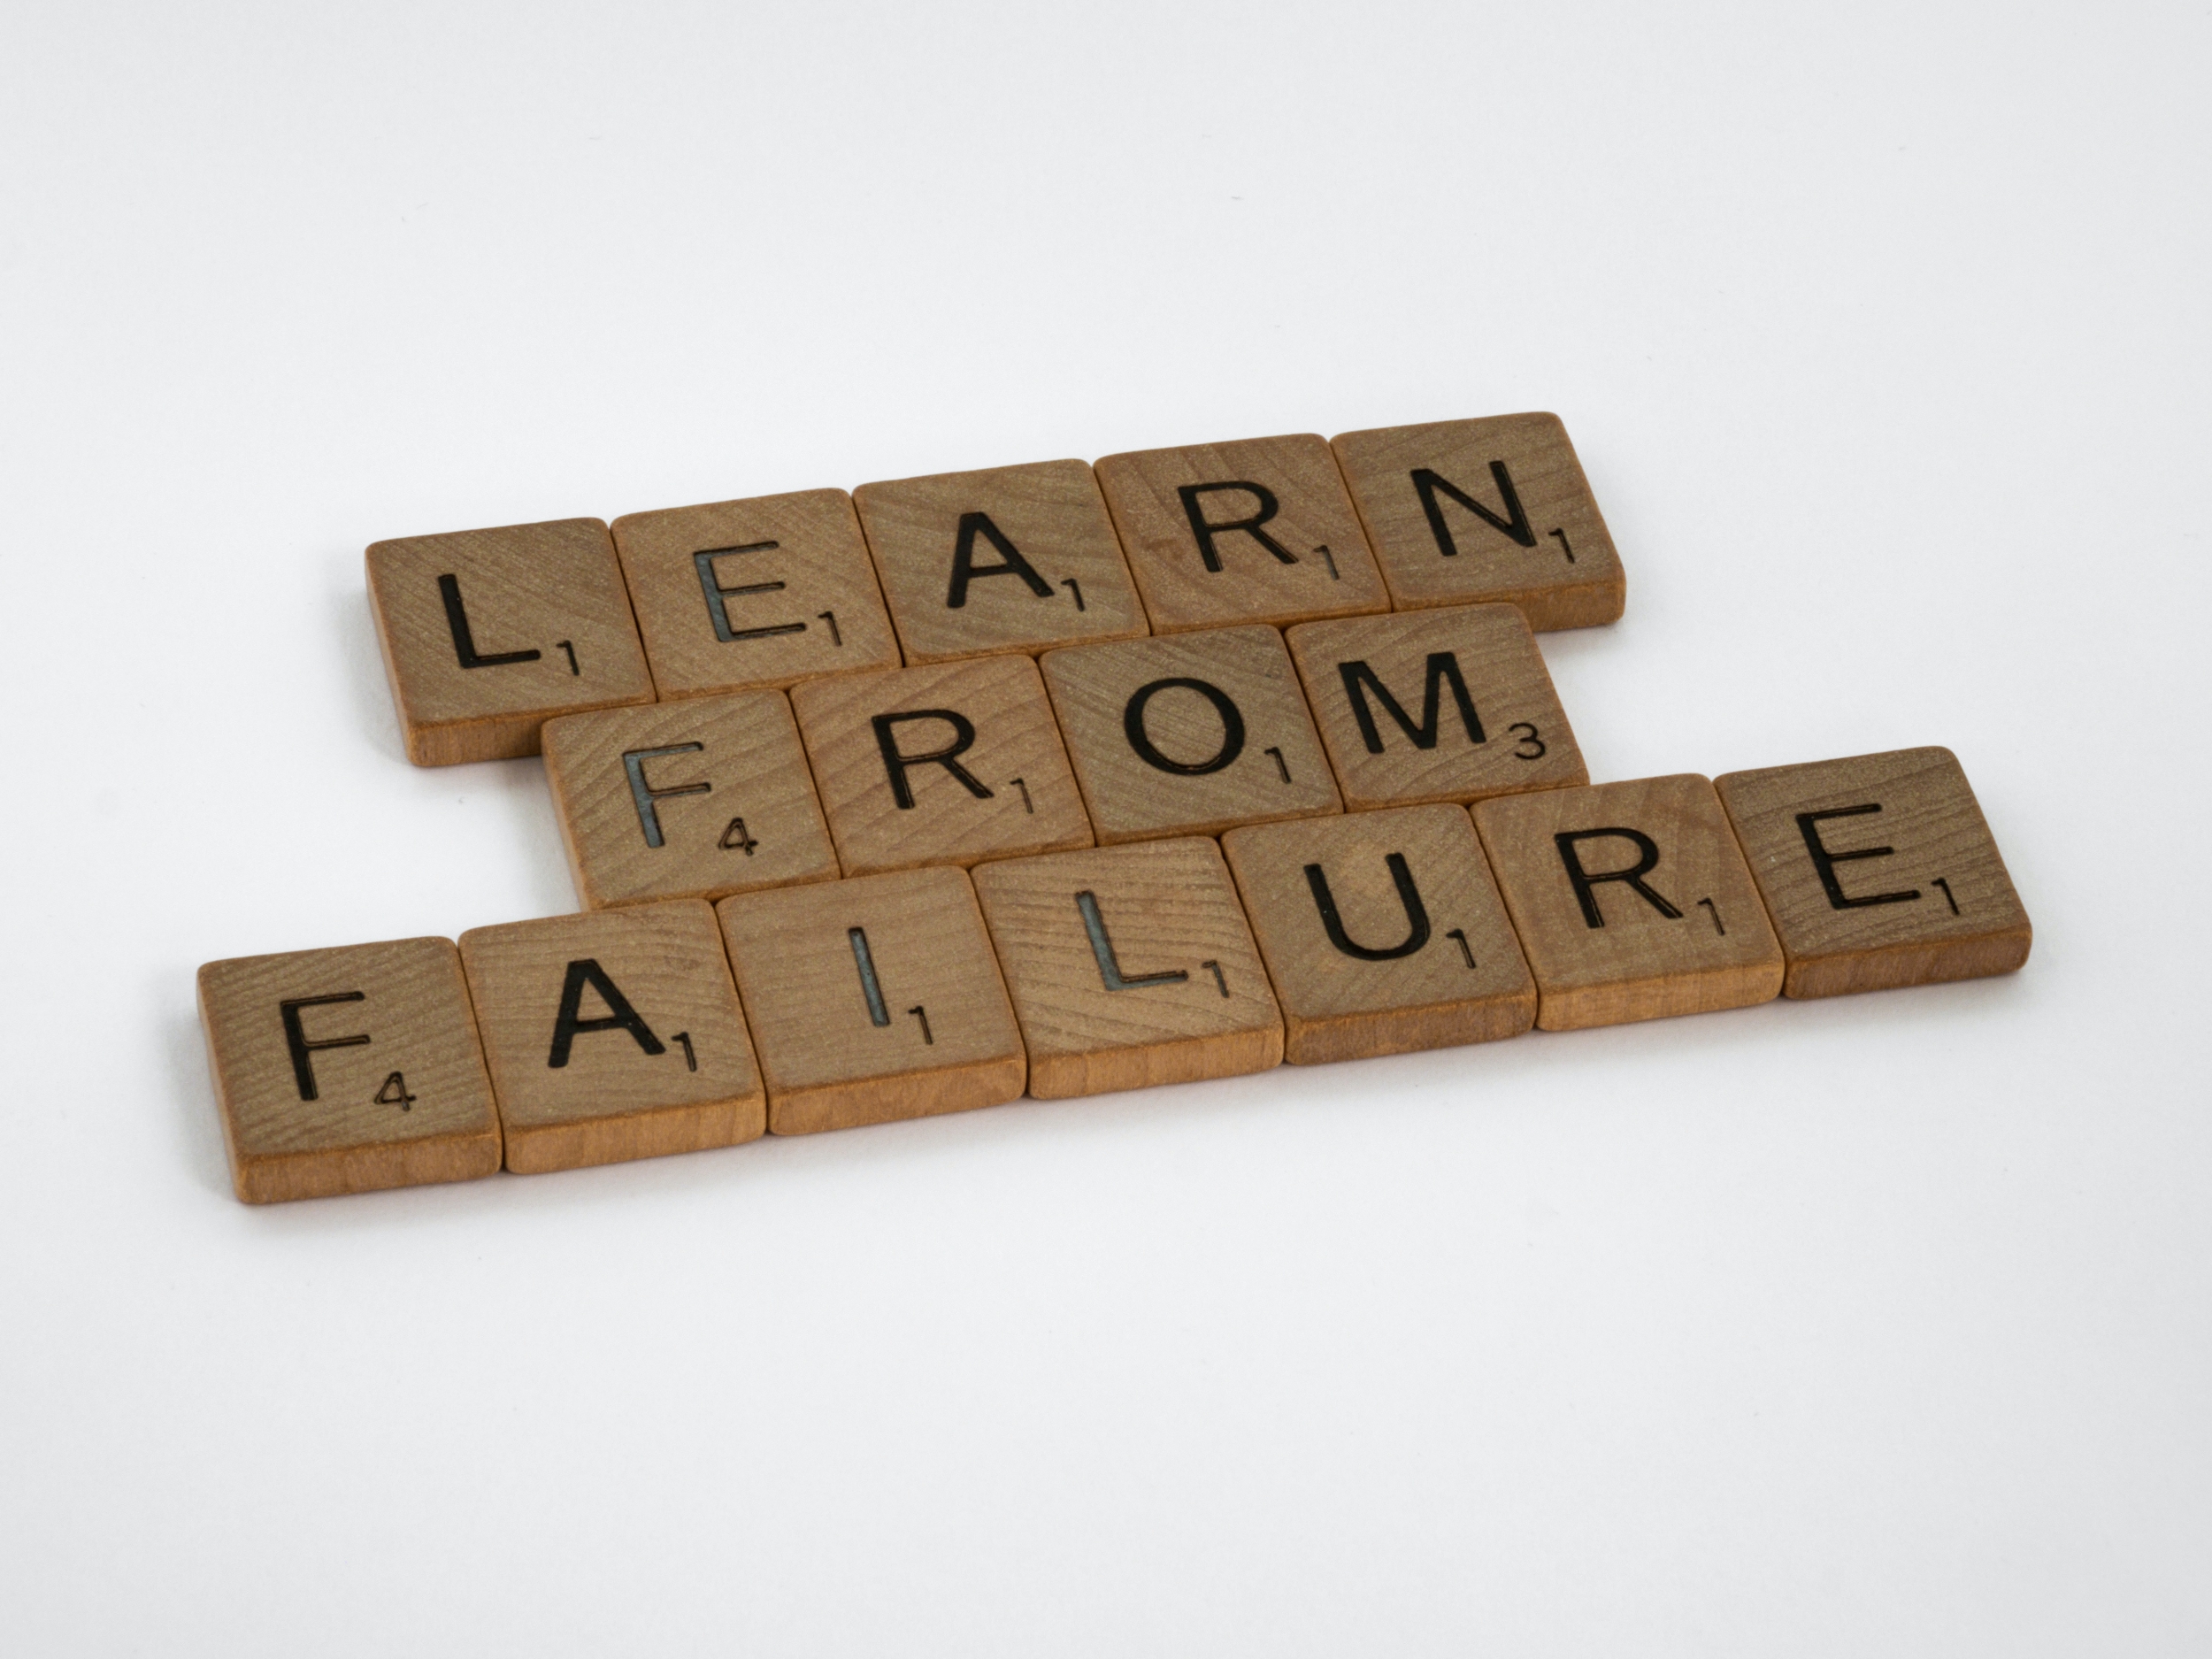 Scrabble tiles that read "Learn From Failure"